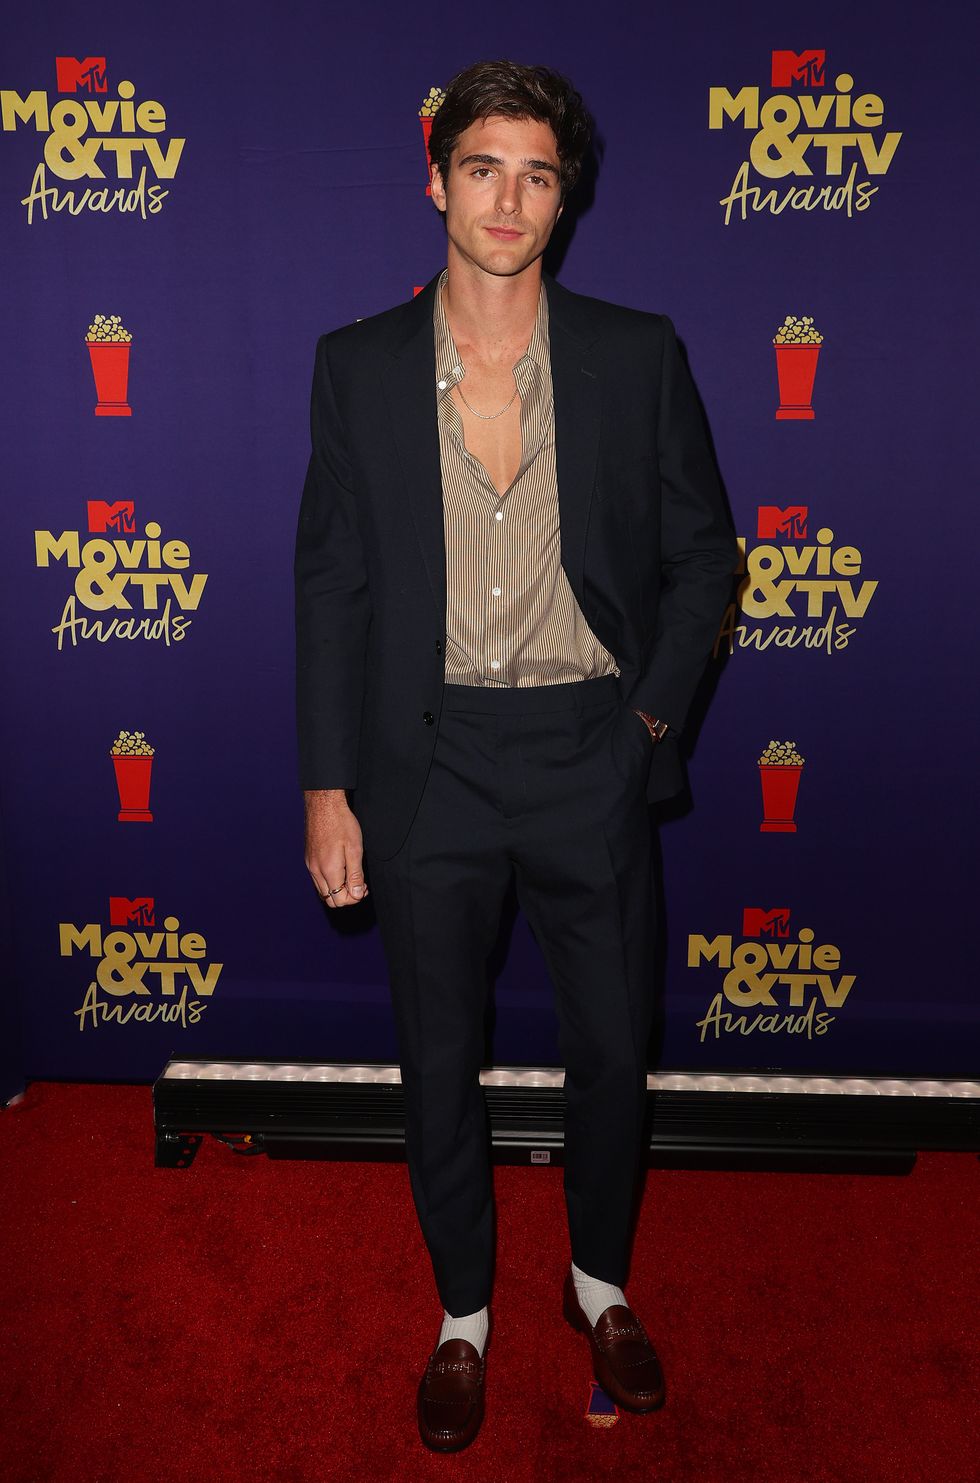 los angeles, california may 16 jacob elordi poses backstage during the 2021 mtv movie tv awards at the hollywood palladium on may 16, 2021 in los angeles, california photo by kevin winter2021 mtv movie and tv awardsgetty images for mtvviacomcbs